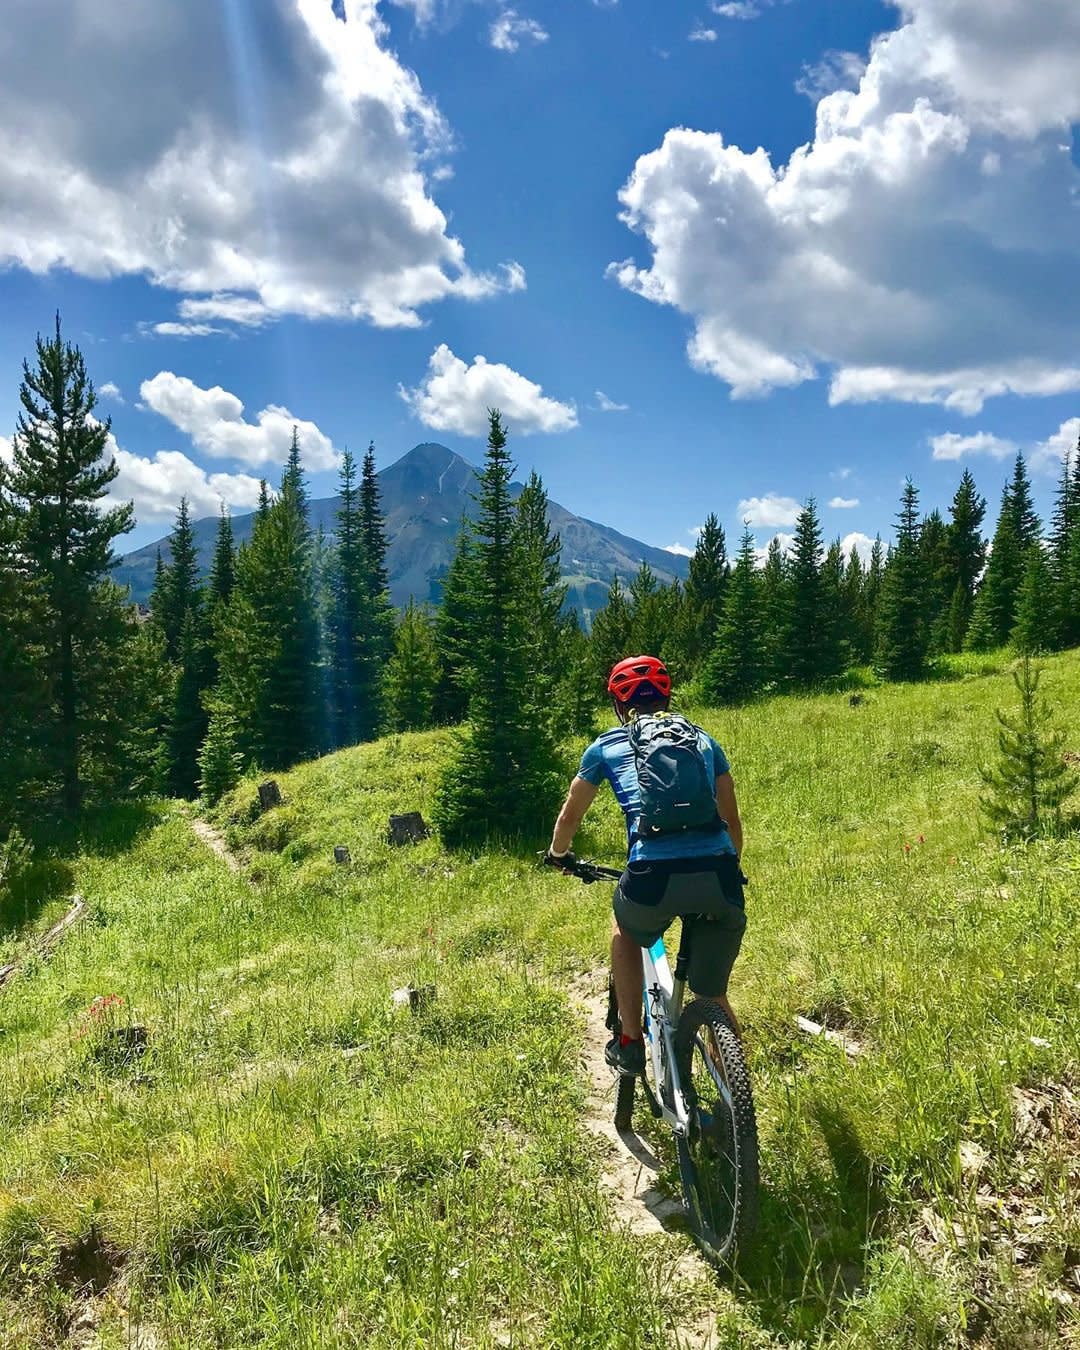 Photo by user dhirschi, caption reads Just me and my guy under one Big Sky! 👬

#bigsky #mtb #montana #summerdays #happyplace